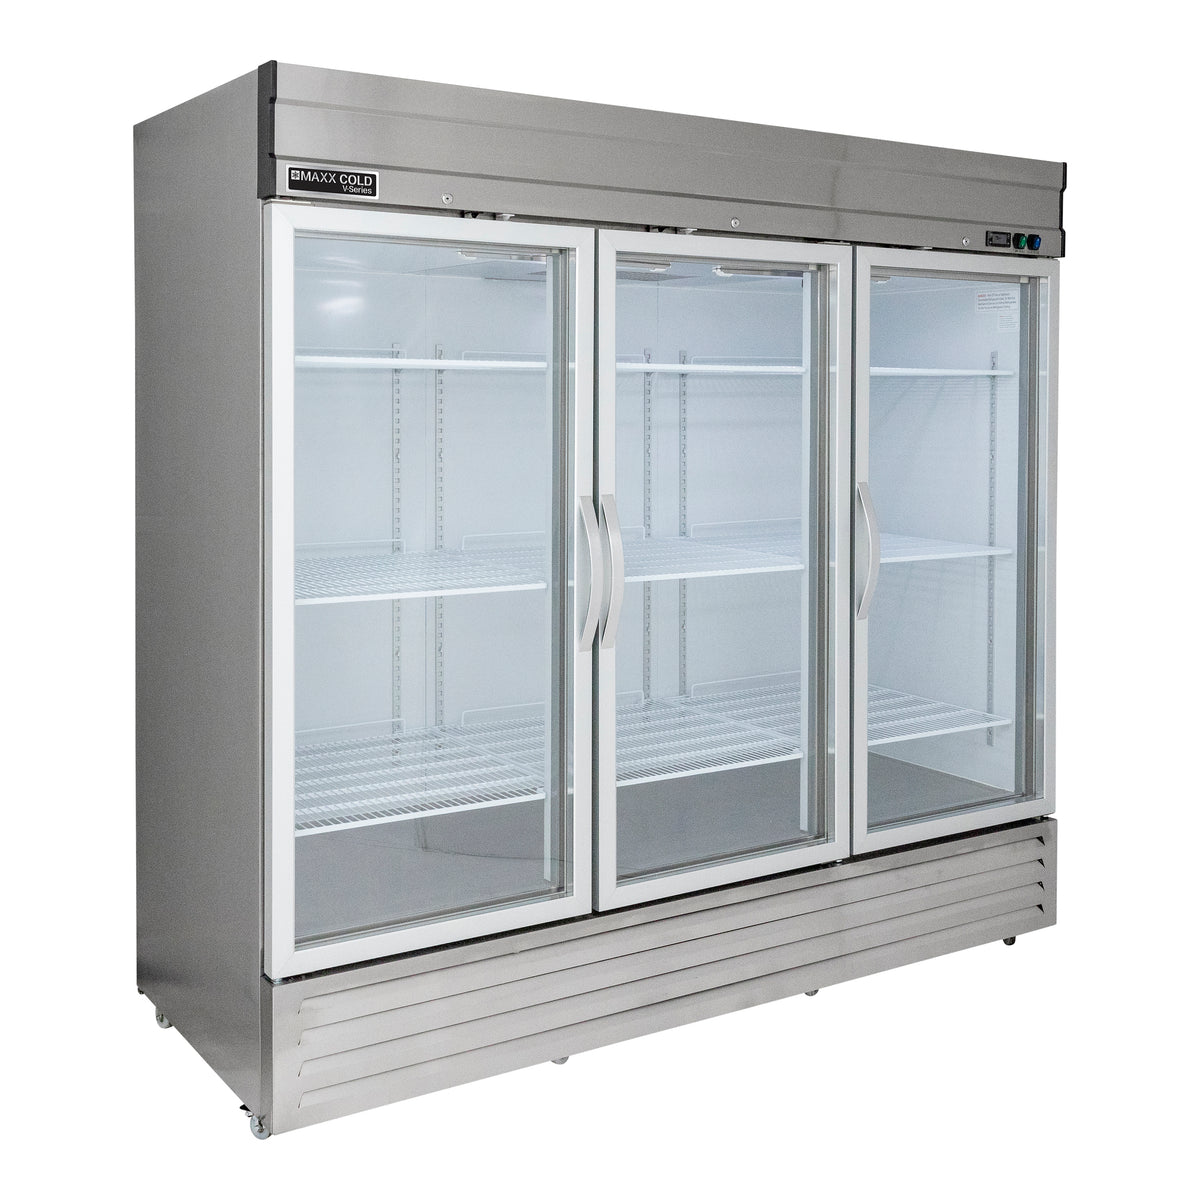 Maxx Cold MVR-72GD V-Series 3 Glass Door Reach-In Refrigerator, Bottom Mount, 81"W, 65 cu. ft. Storage Capacity, in Stainless Steel (MVR-72GDHC)